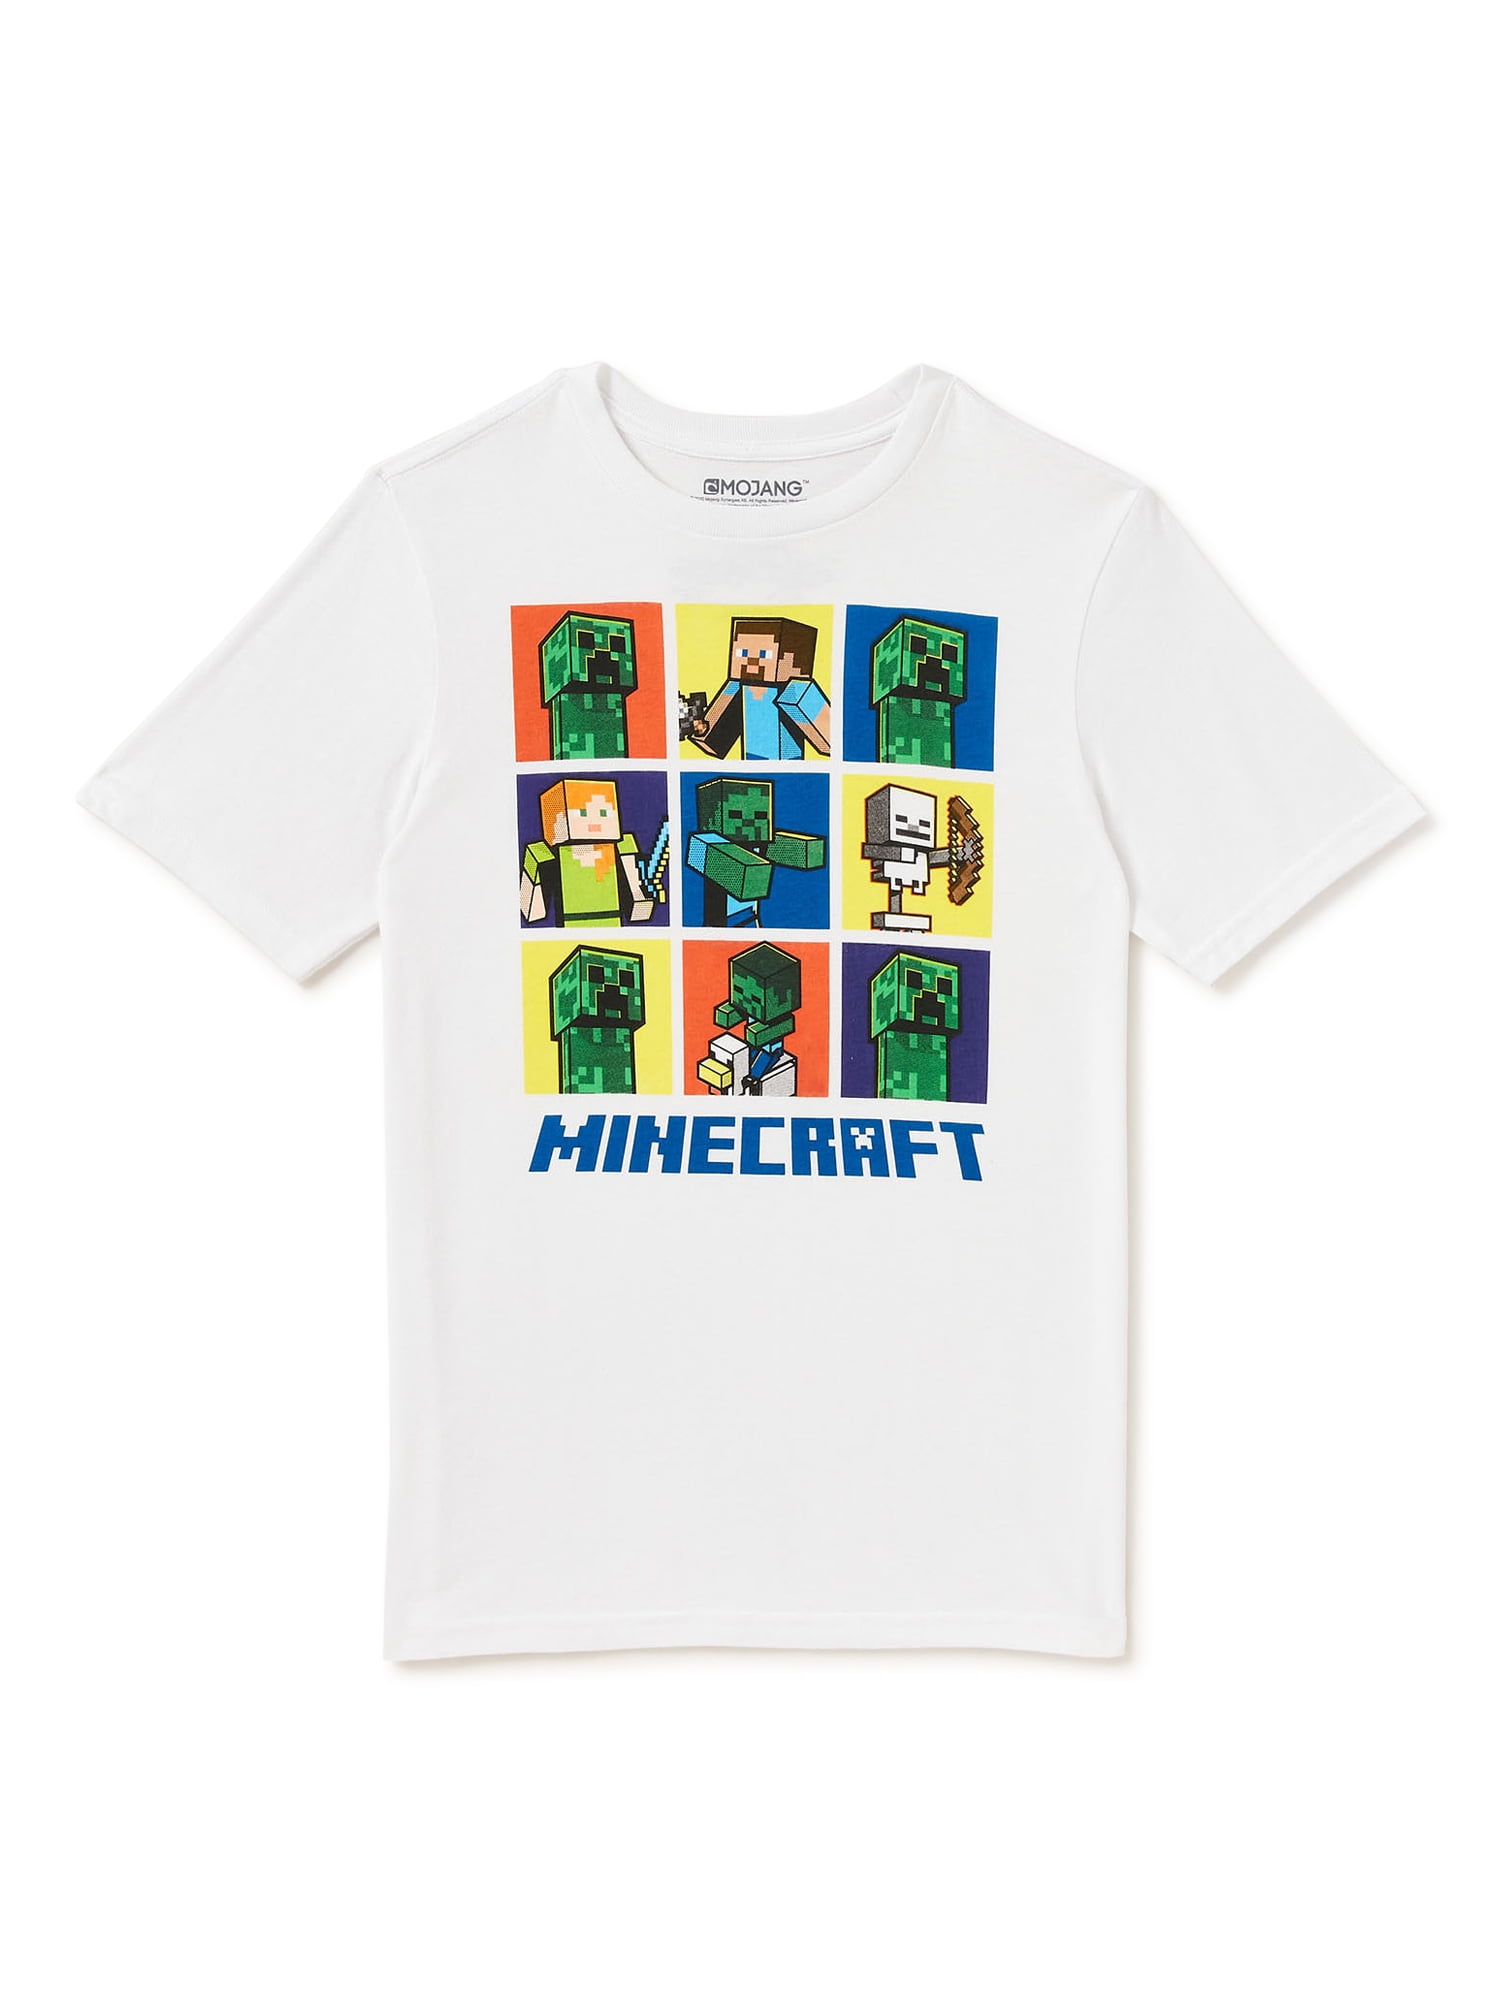 Minecraft T Shirt for Boys Teens Black Short Sleeve Top for Kids Age 5-15